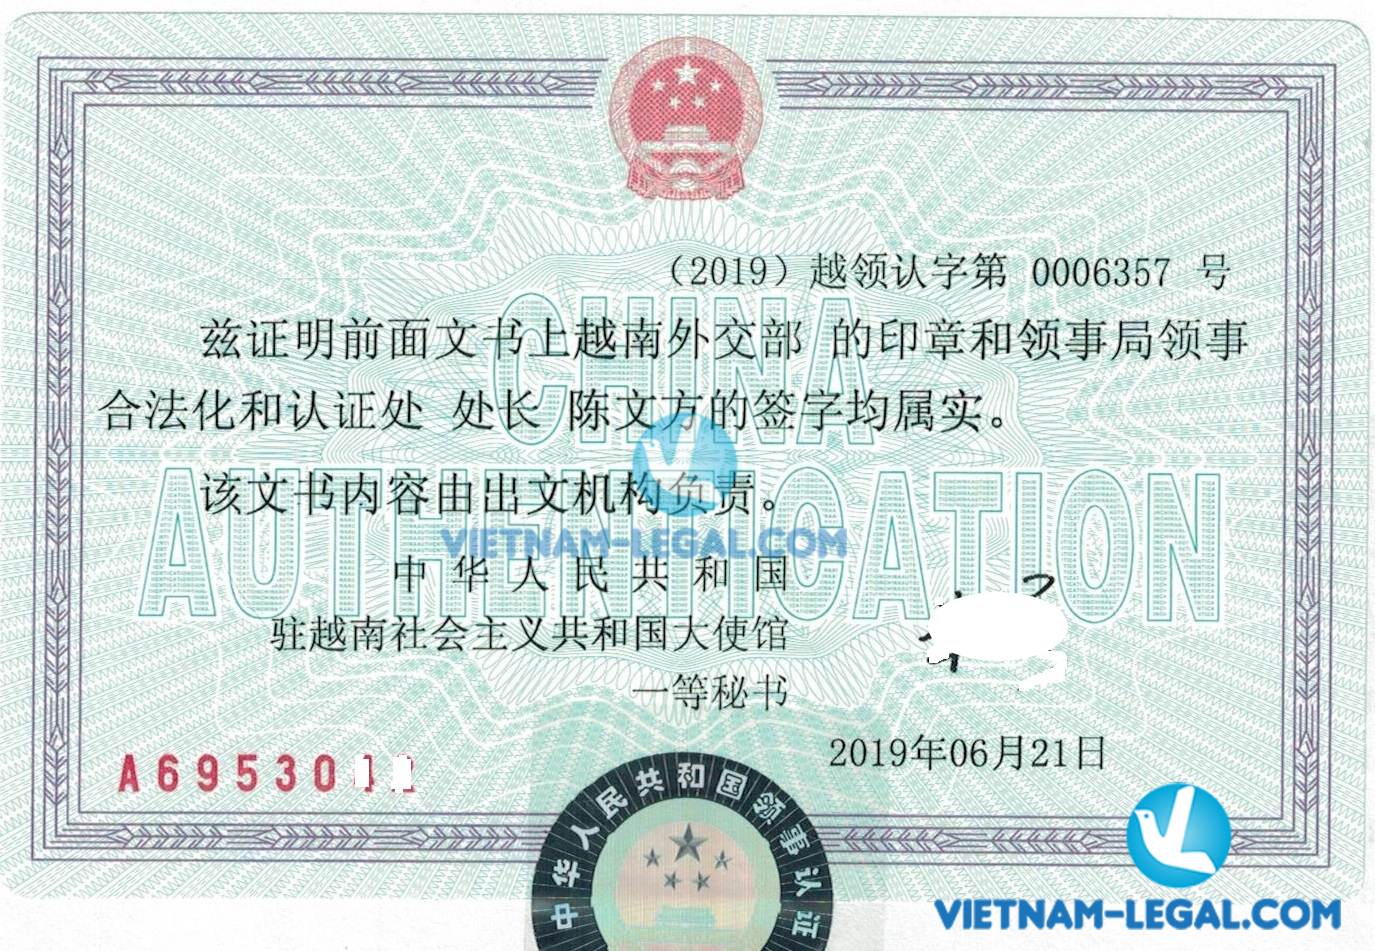 Legalization Result of Vietnamese Document for use in China, June 2019